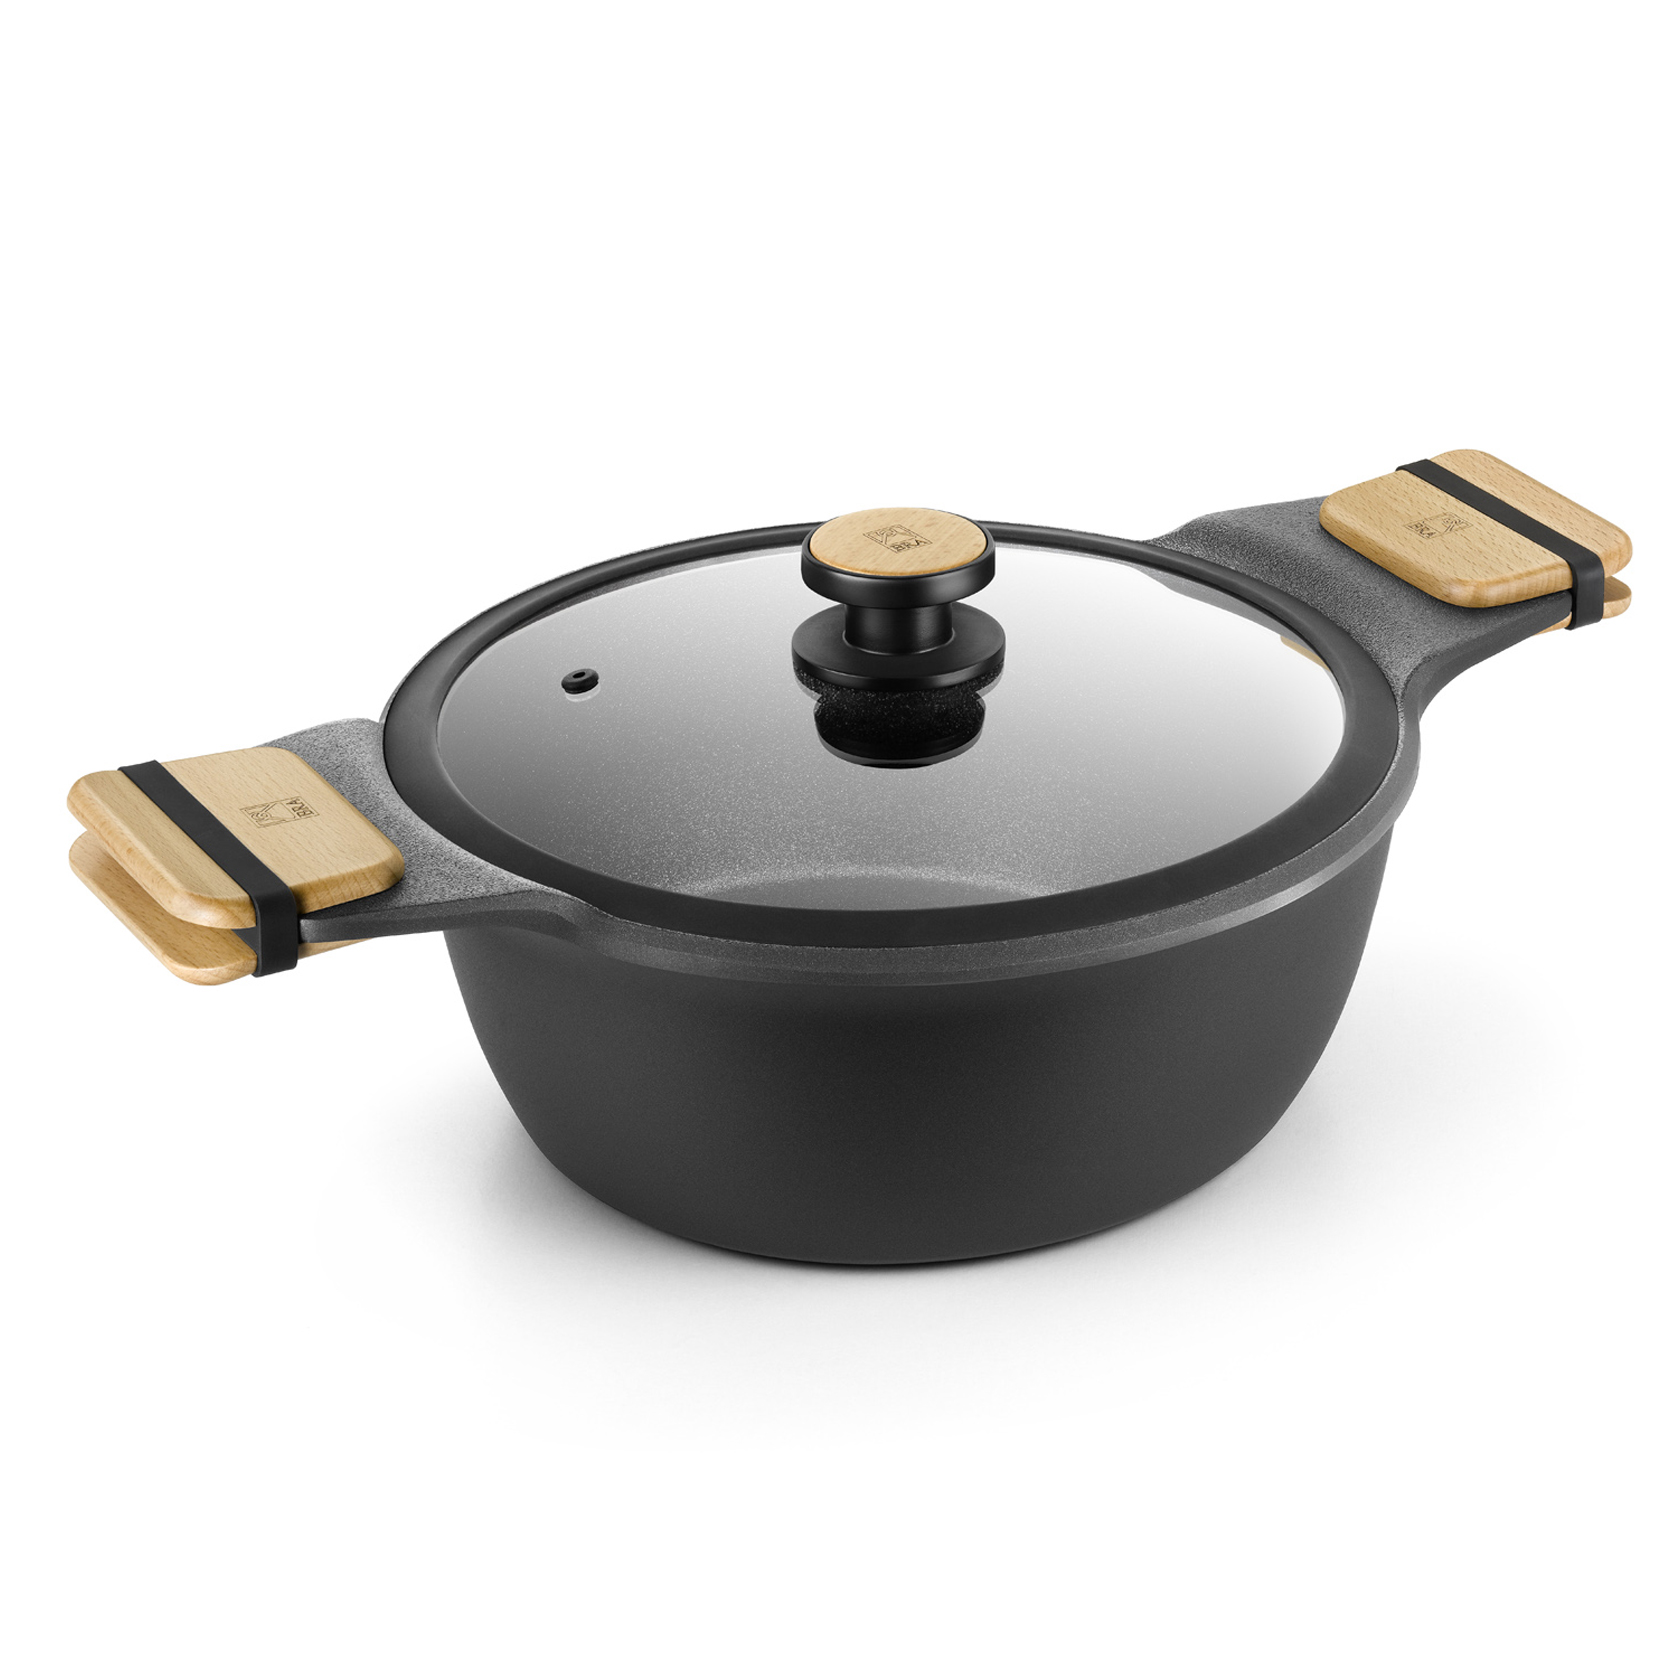 All Cookers Including Induction 24 cm Braisogona Prior Highly Durable with Pfoa-Free Non-Stick Coating Tall Casserole Black Cast Aluminium 